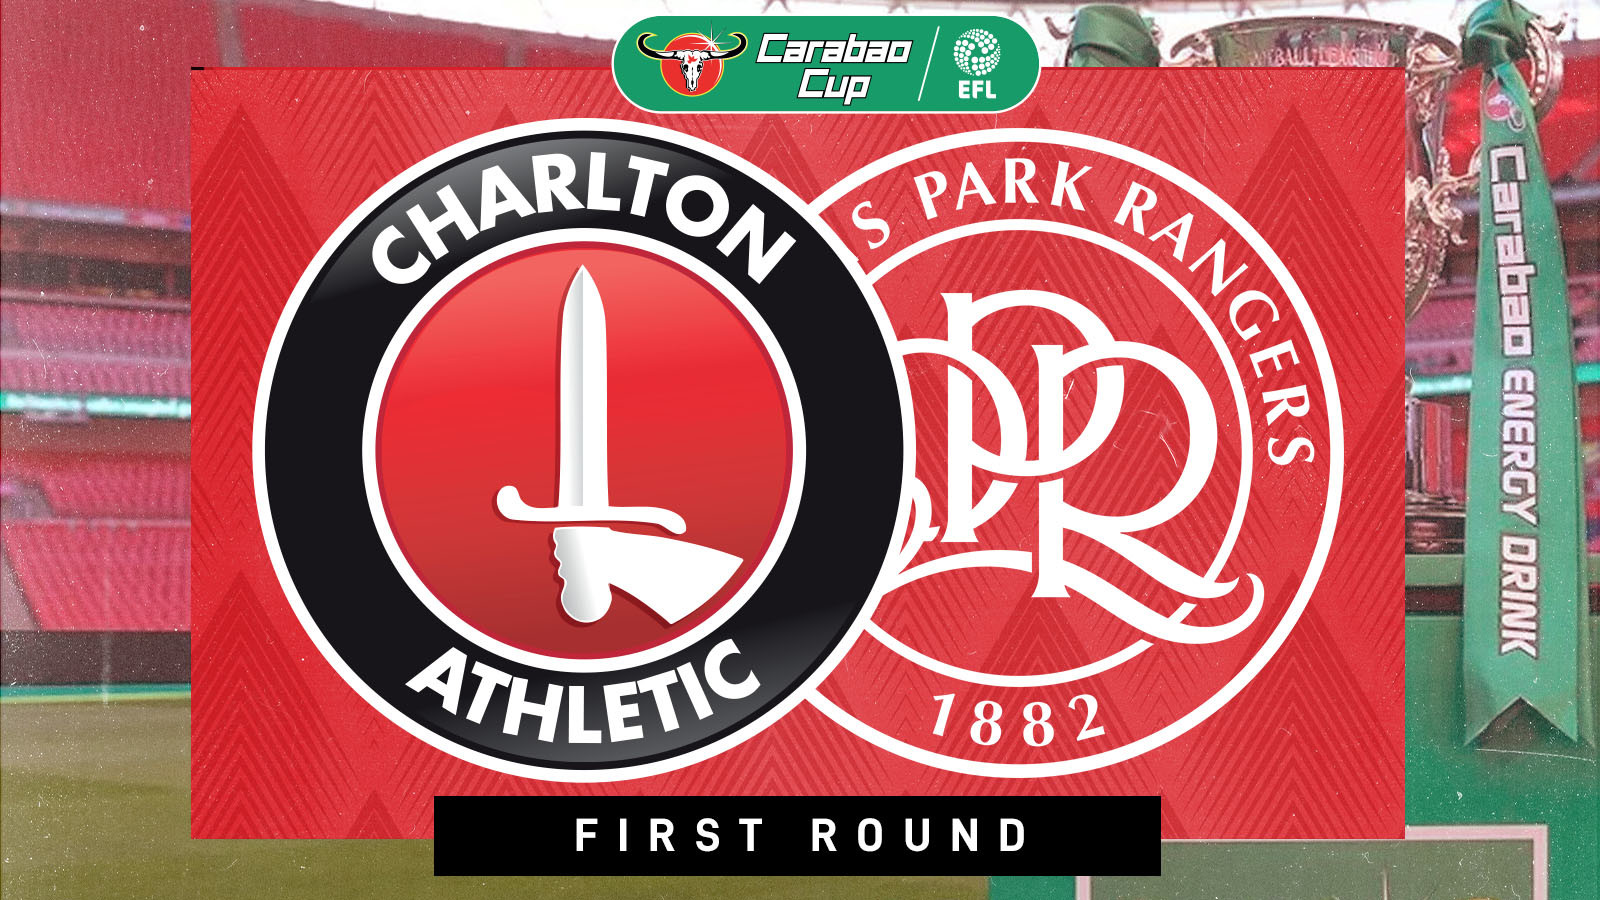 Charlton will face Queens Park Rangers at The Valley in the Carabao Cup first round